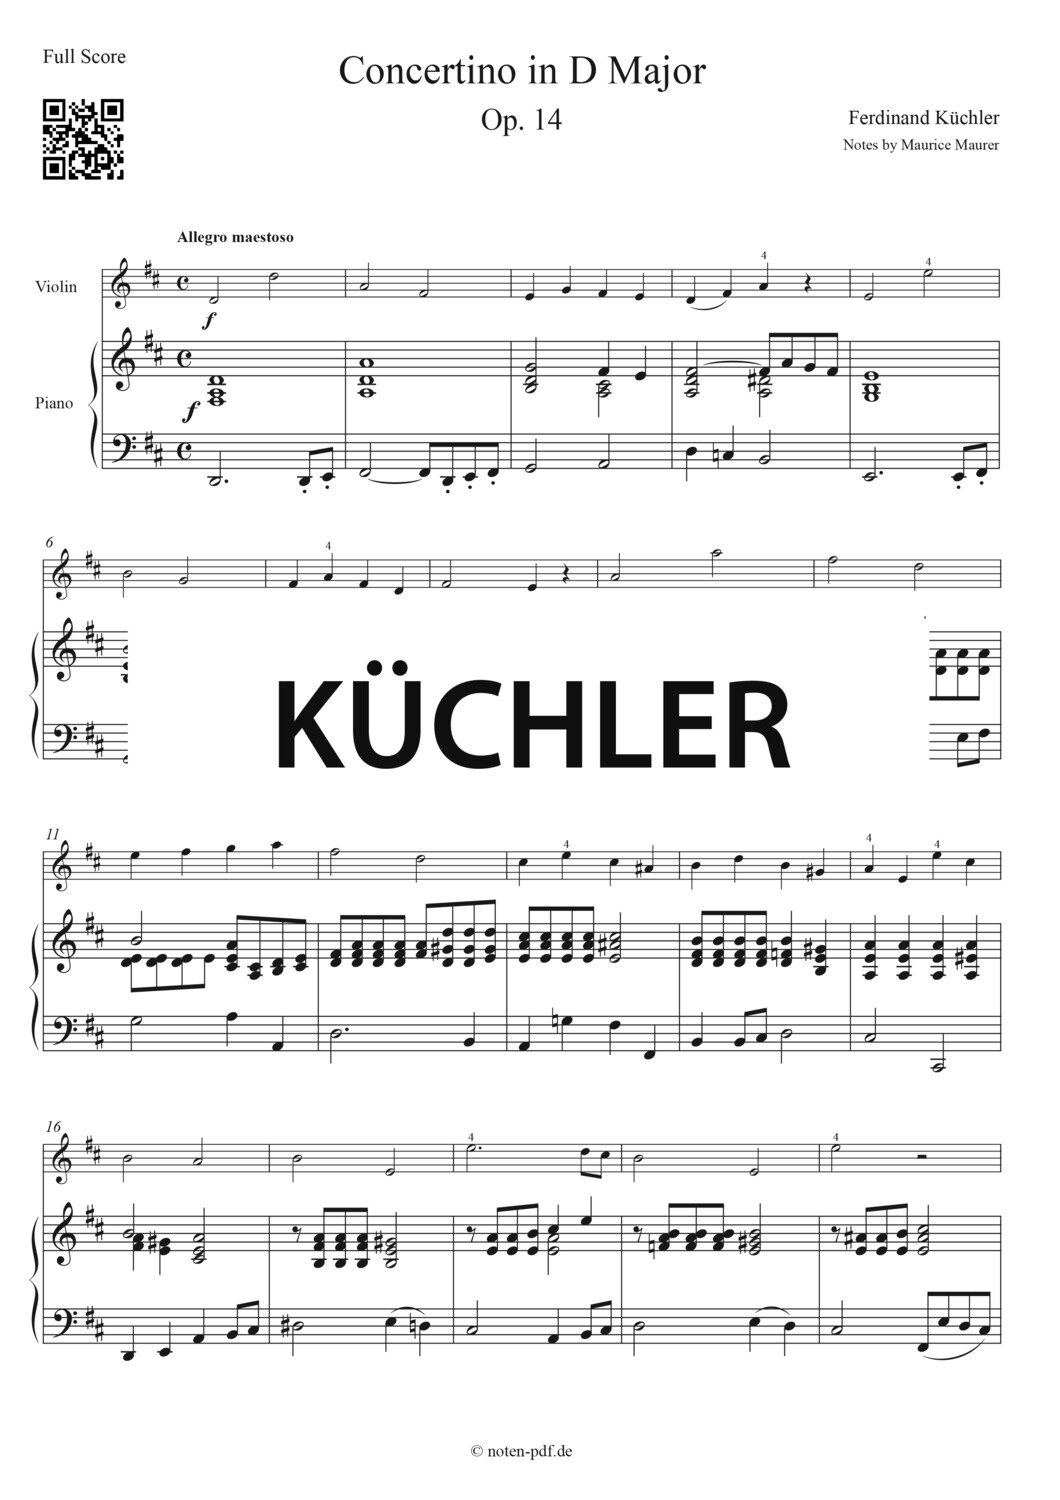 Küchler: Concertino Op. 14 - All Movements